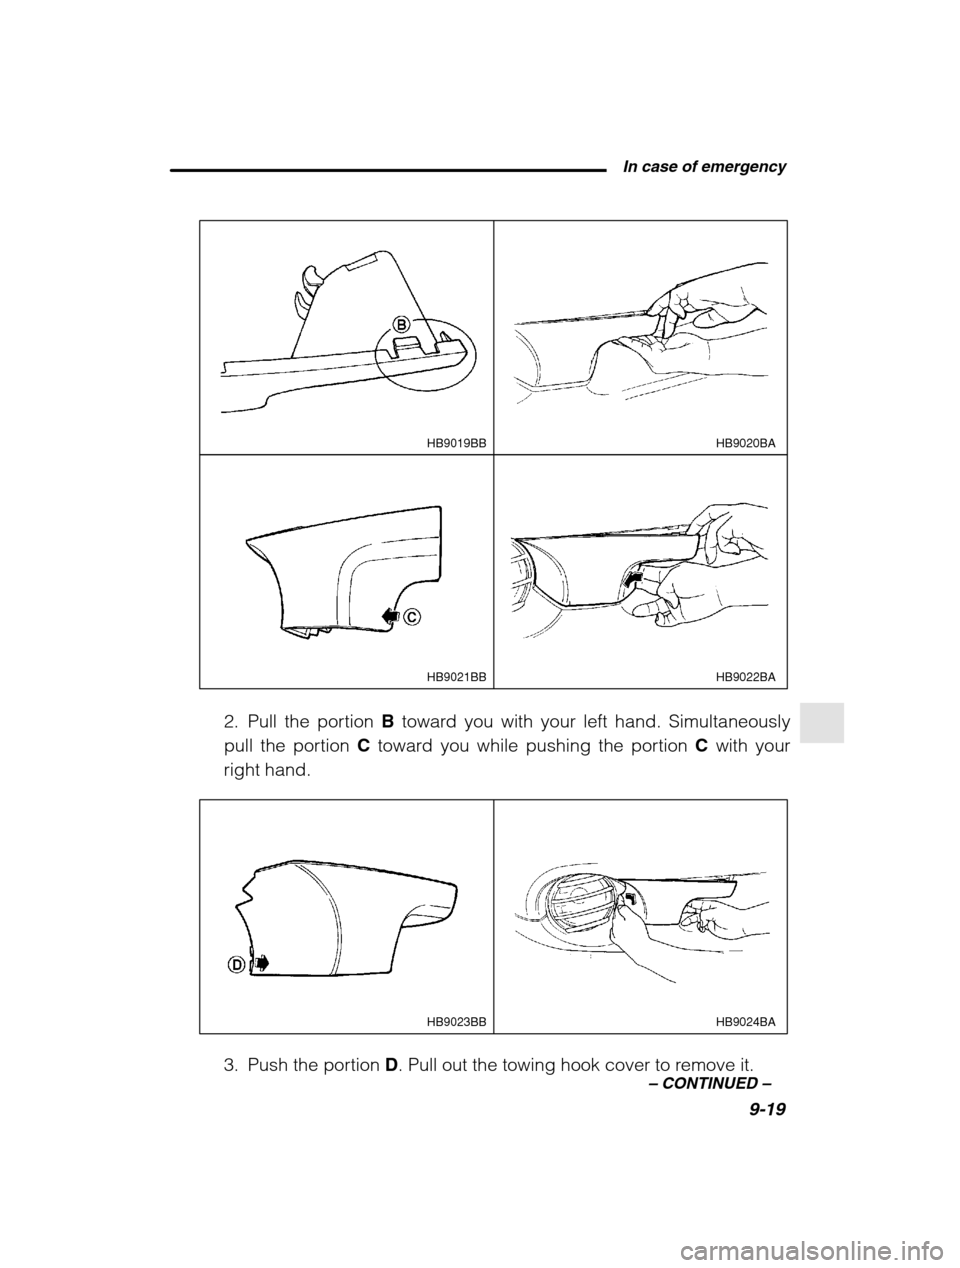 SUBARU LEGACY 2002 3.G Owners Manual  In case of emergency9-19
–
 CONTINUED  –
HB9020BA
HB9019BB
HB9022BA
HB9021BB
2. Pull the portion  B toward you with your left hand. Simultaneously
pull the portion  C toward you while pushing the